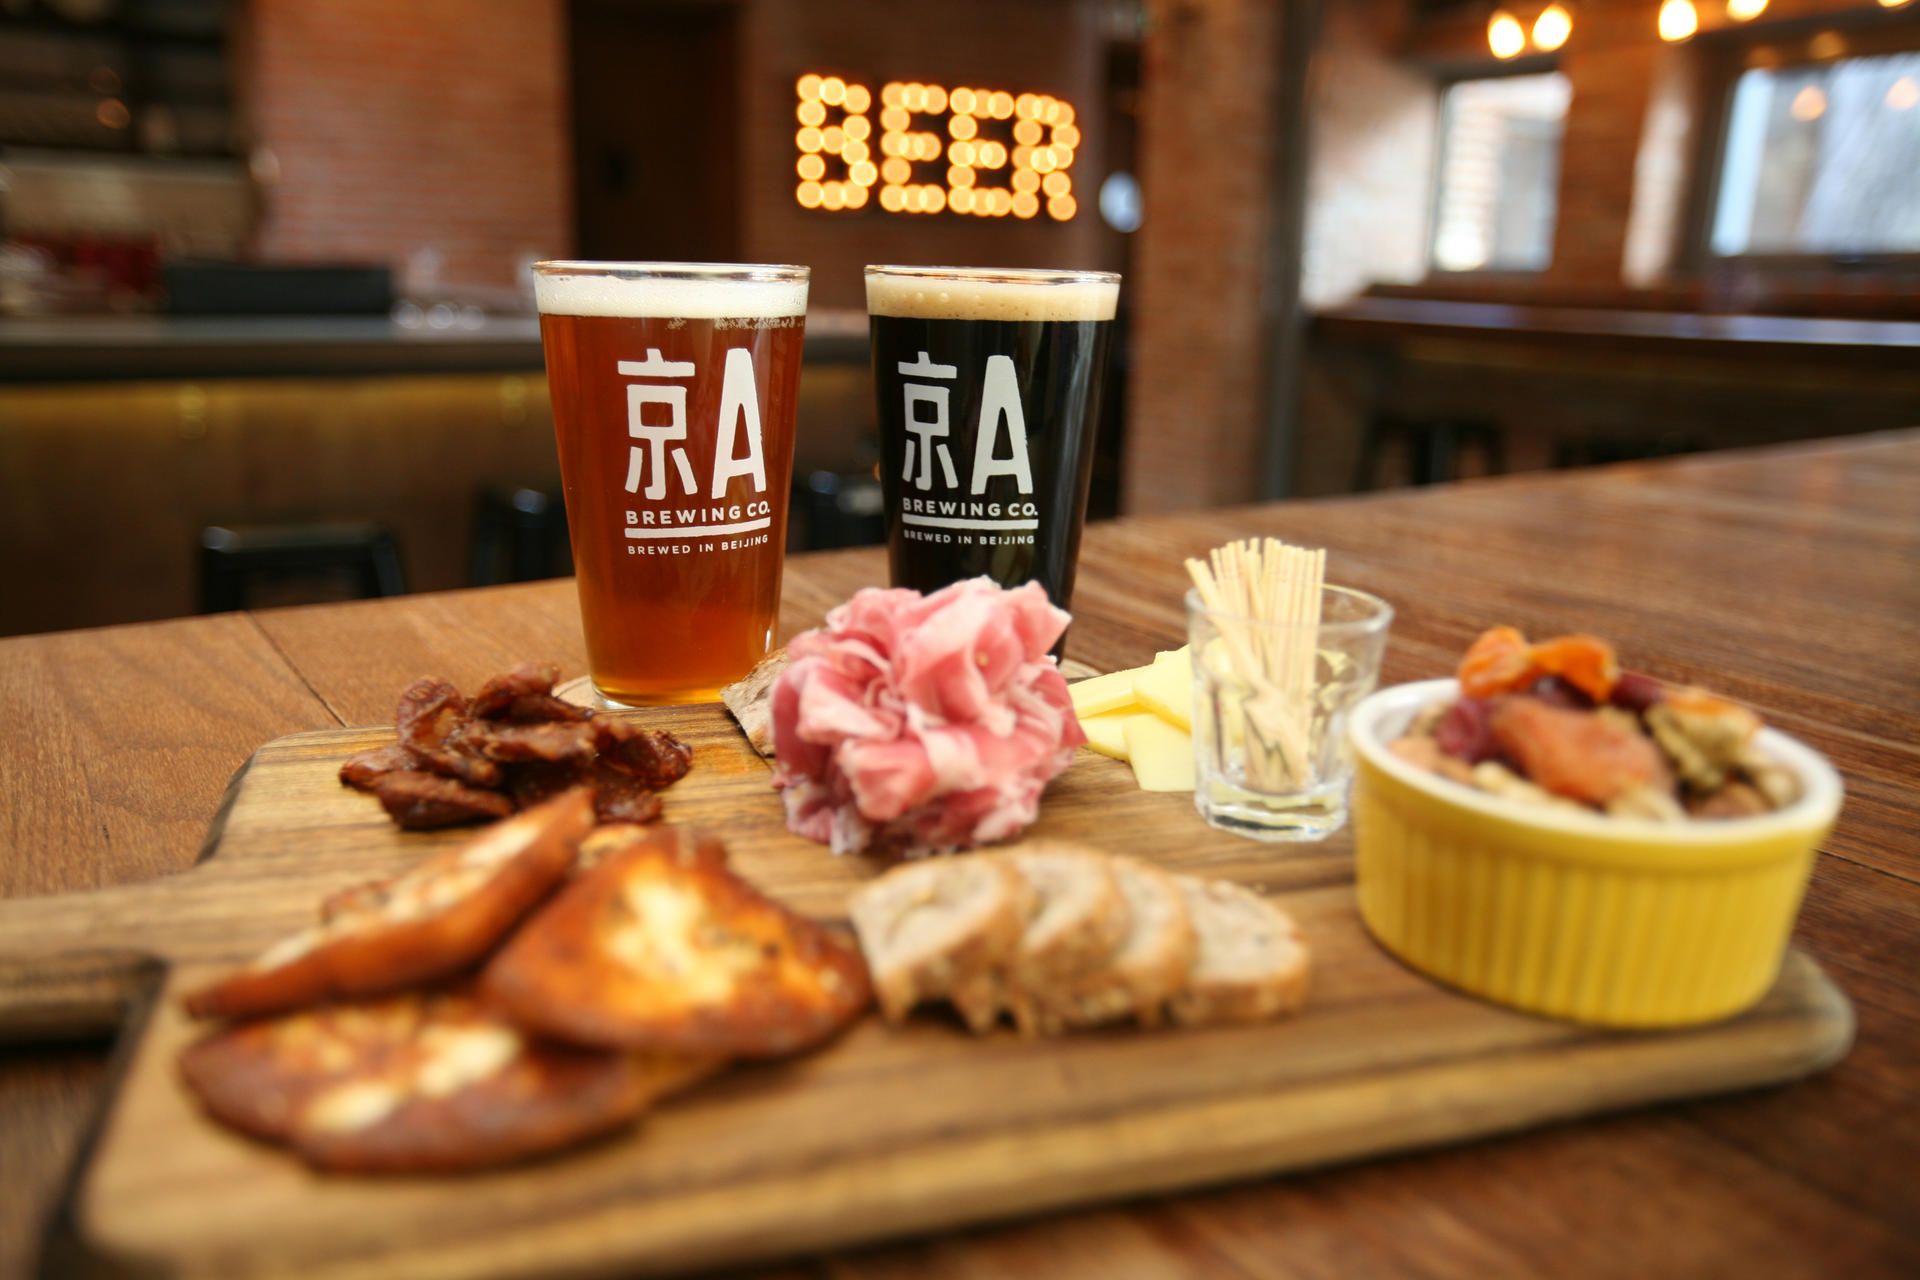 Craft beer and snack platter at Jing-A Taproom in Beijing.